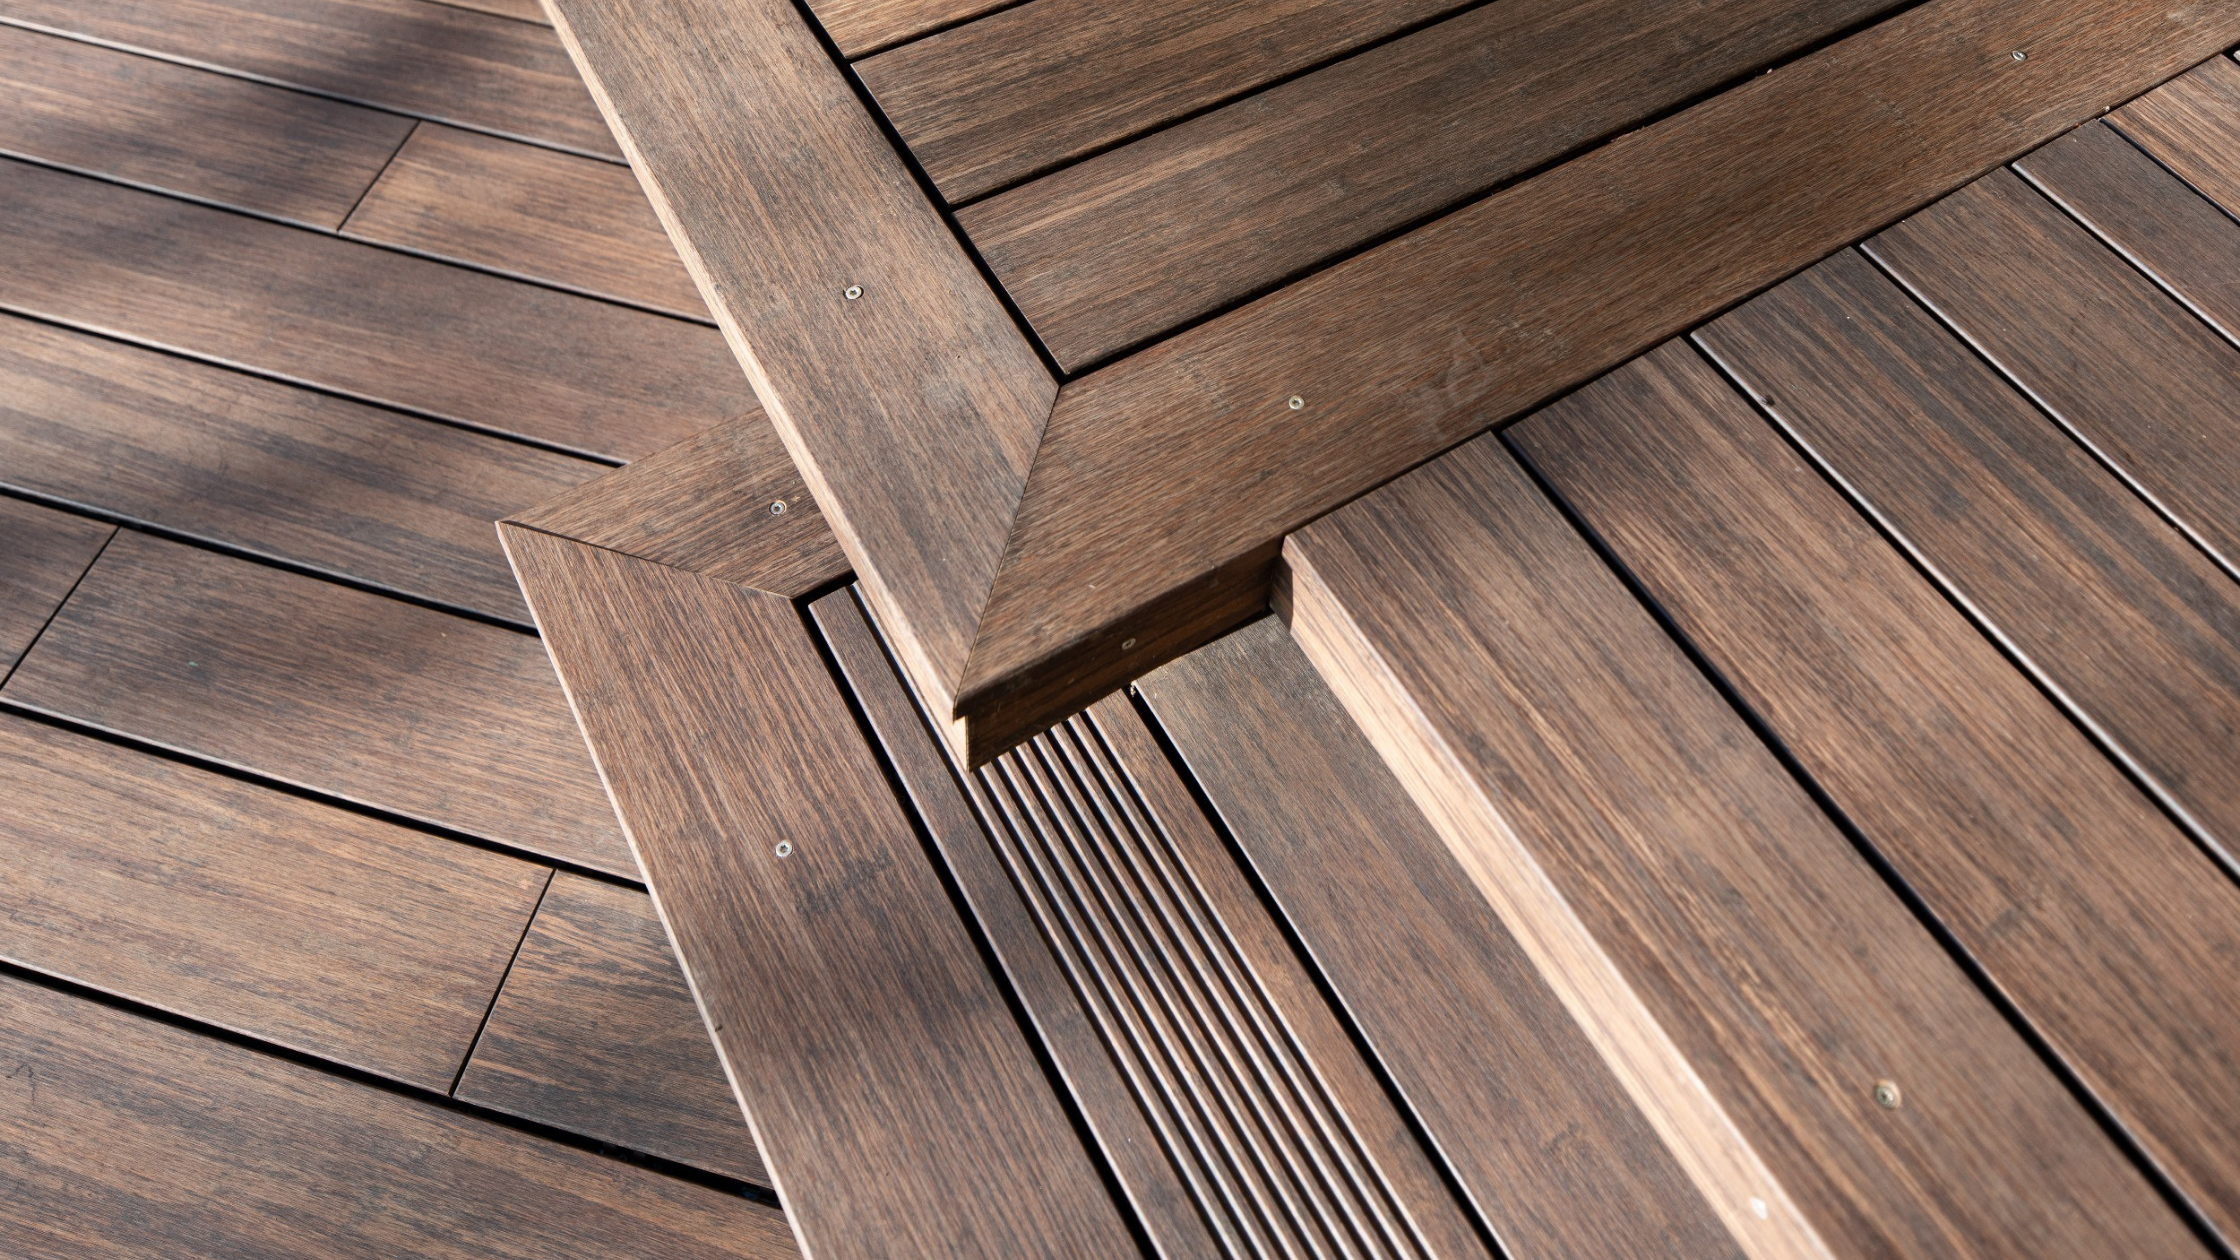 Why should you use bamboo decking planks?